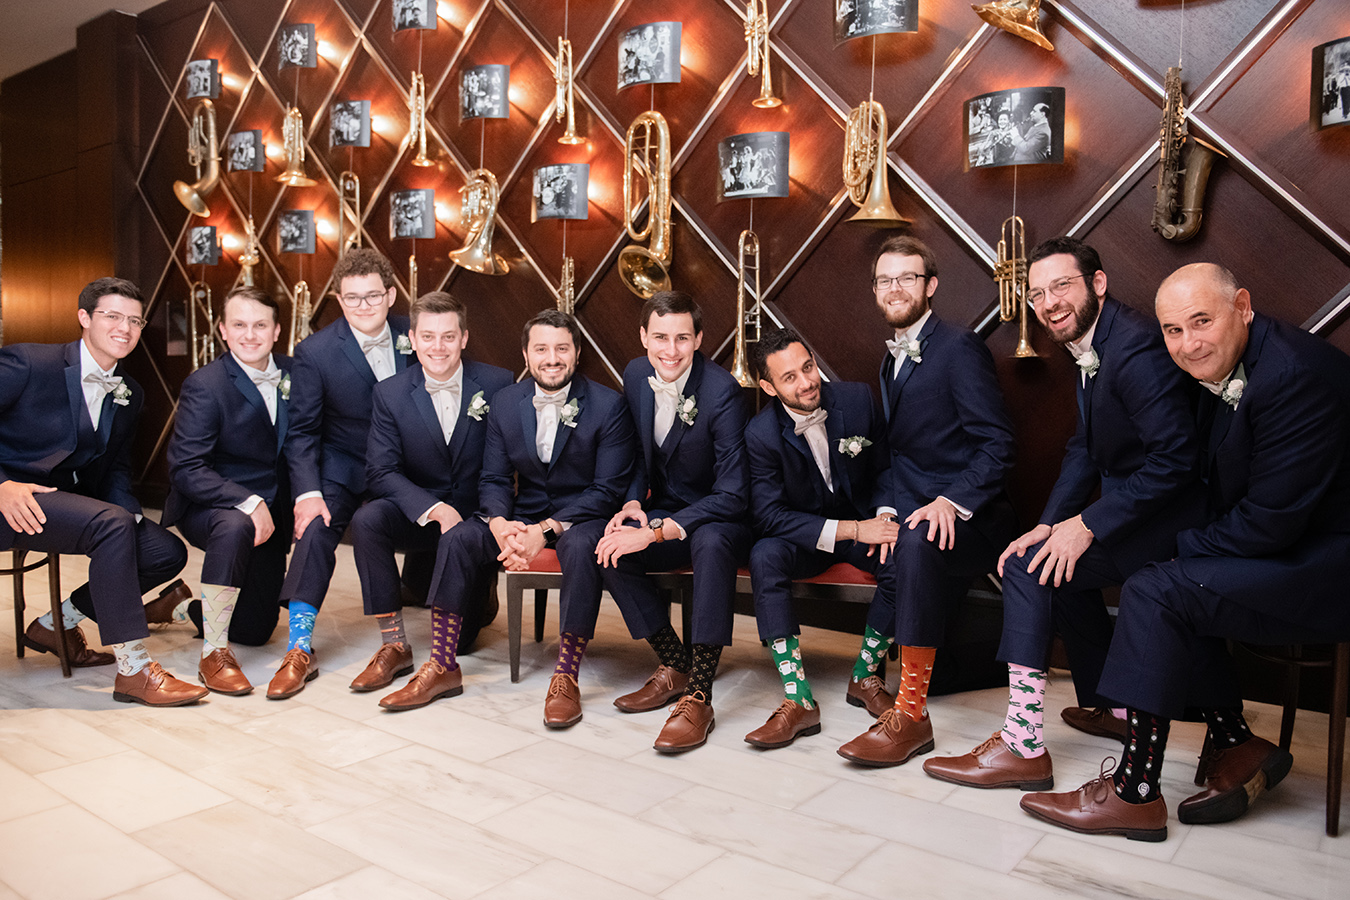 Kevin gifted Bonfolk socks to his groomsmen, each receiving a unique design, but all with NOLA flair!